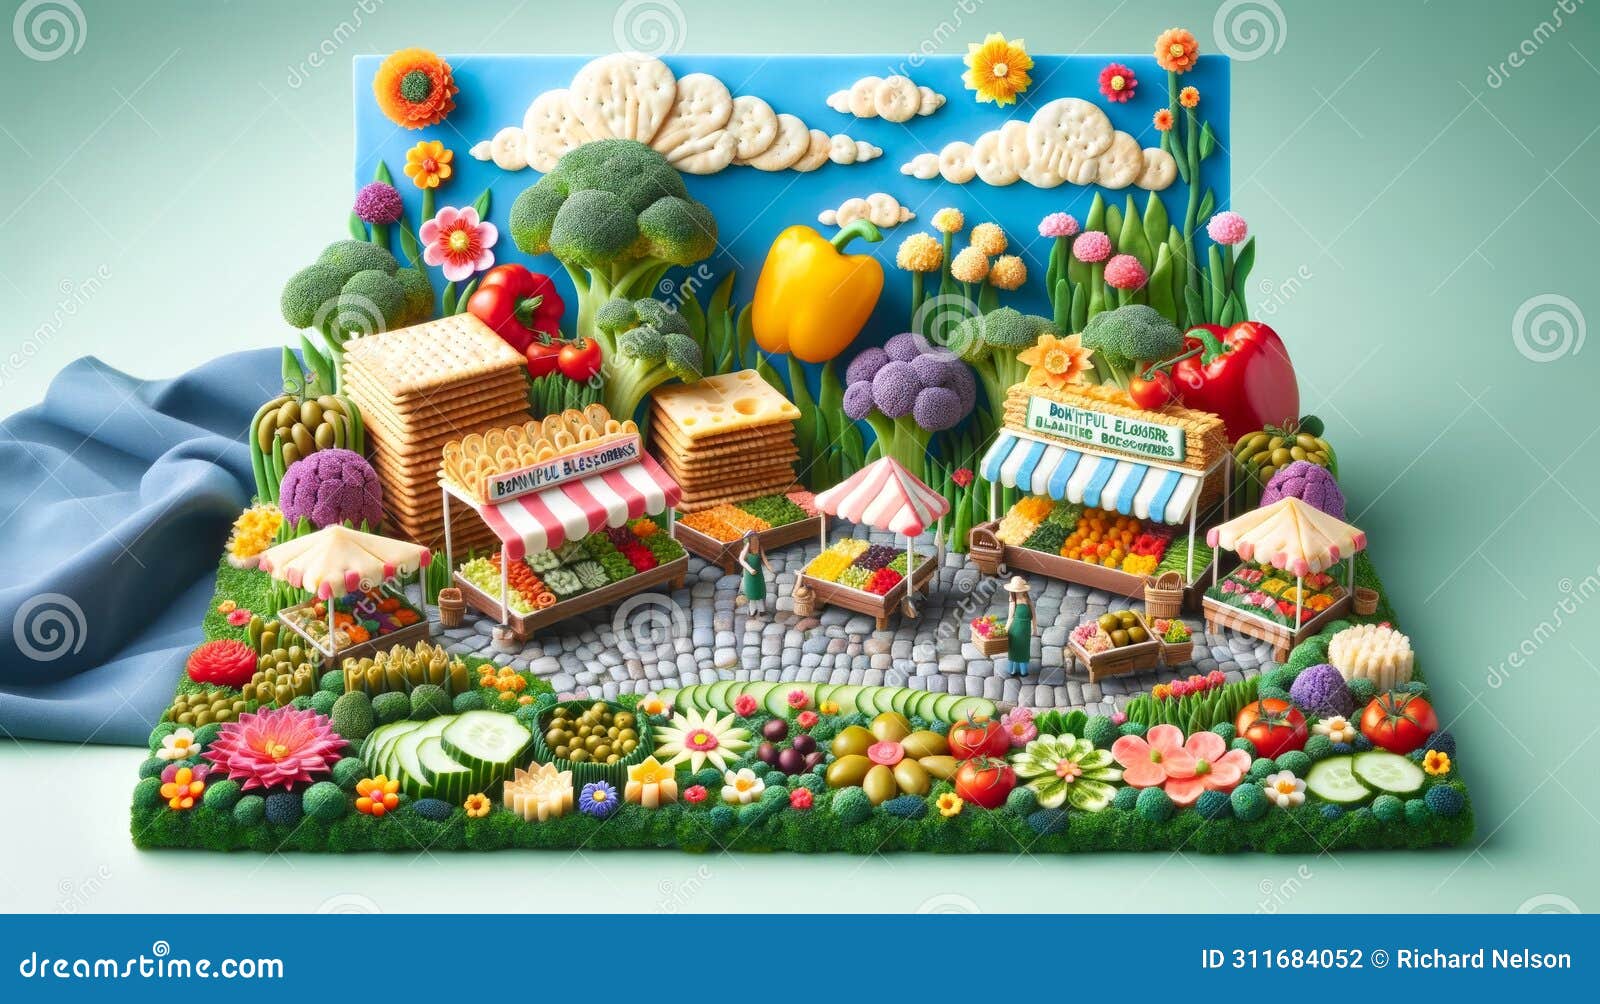 miniature farmers market diorama with colorful details